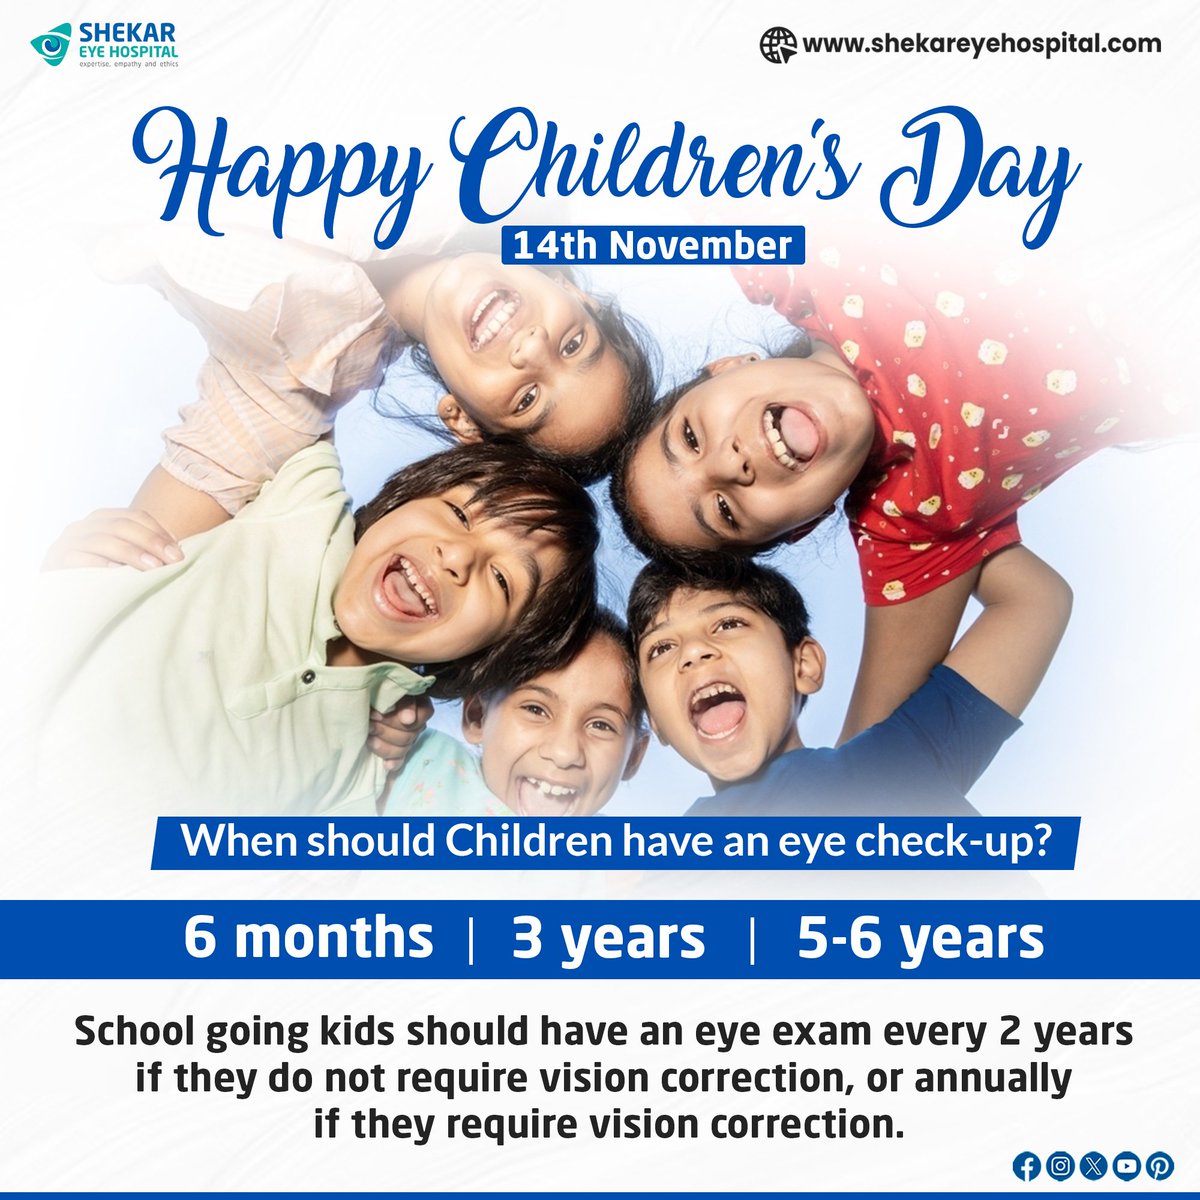 Ensuring a clear vision for our children is paving the way for a bright future.

Website: shekareyehospital.com

#shekareyehospital #SEH #eyecare #bangalore  #protecteyes #childrenday #cildrendaycelebration #eye #clearvision #childrendayspecial #eyecareawarenesss #eyehospital